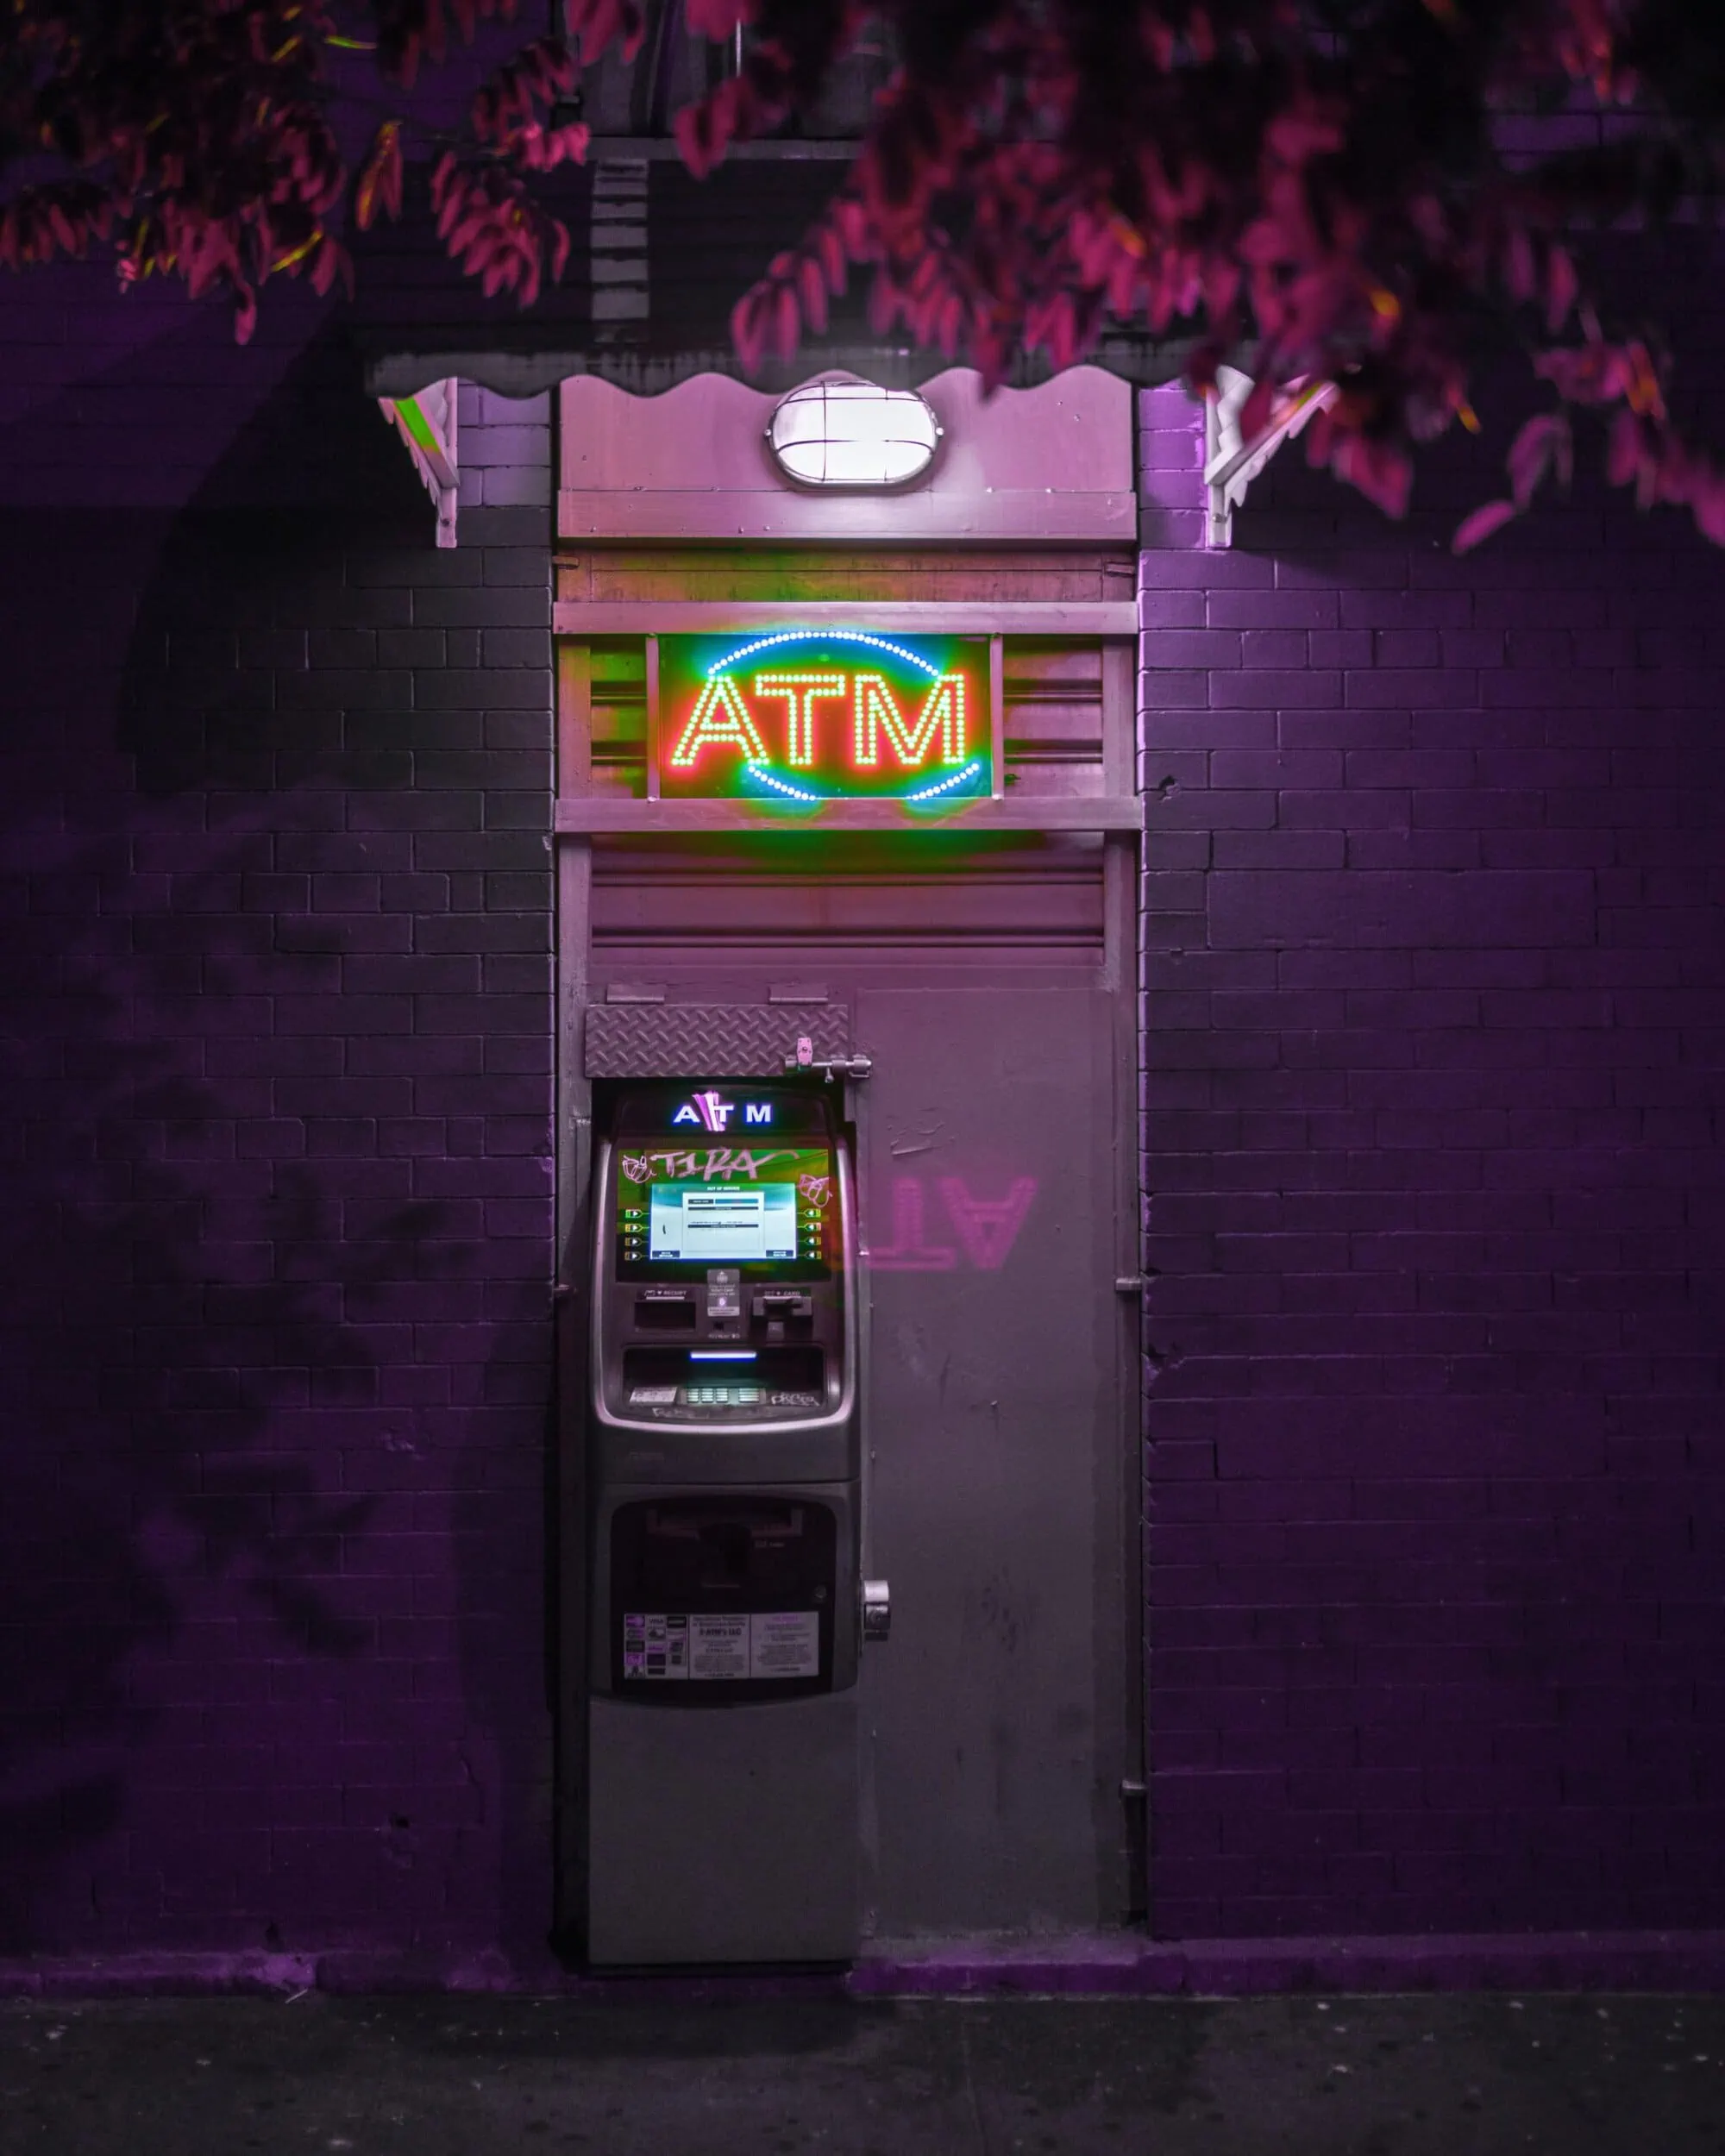 ATM at night secure with bank security cameras